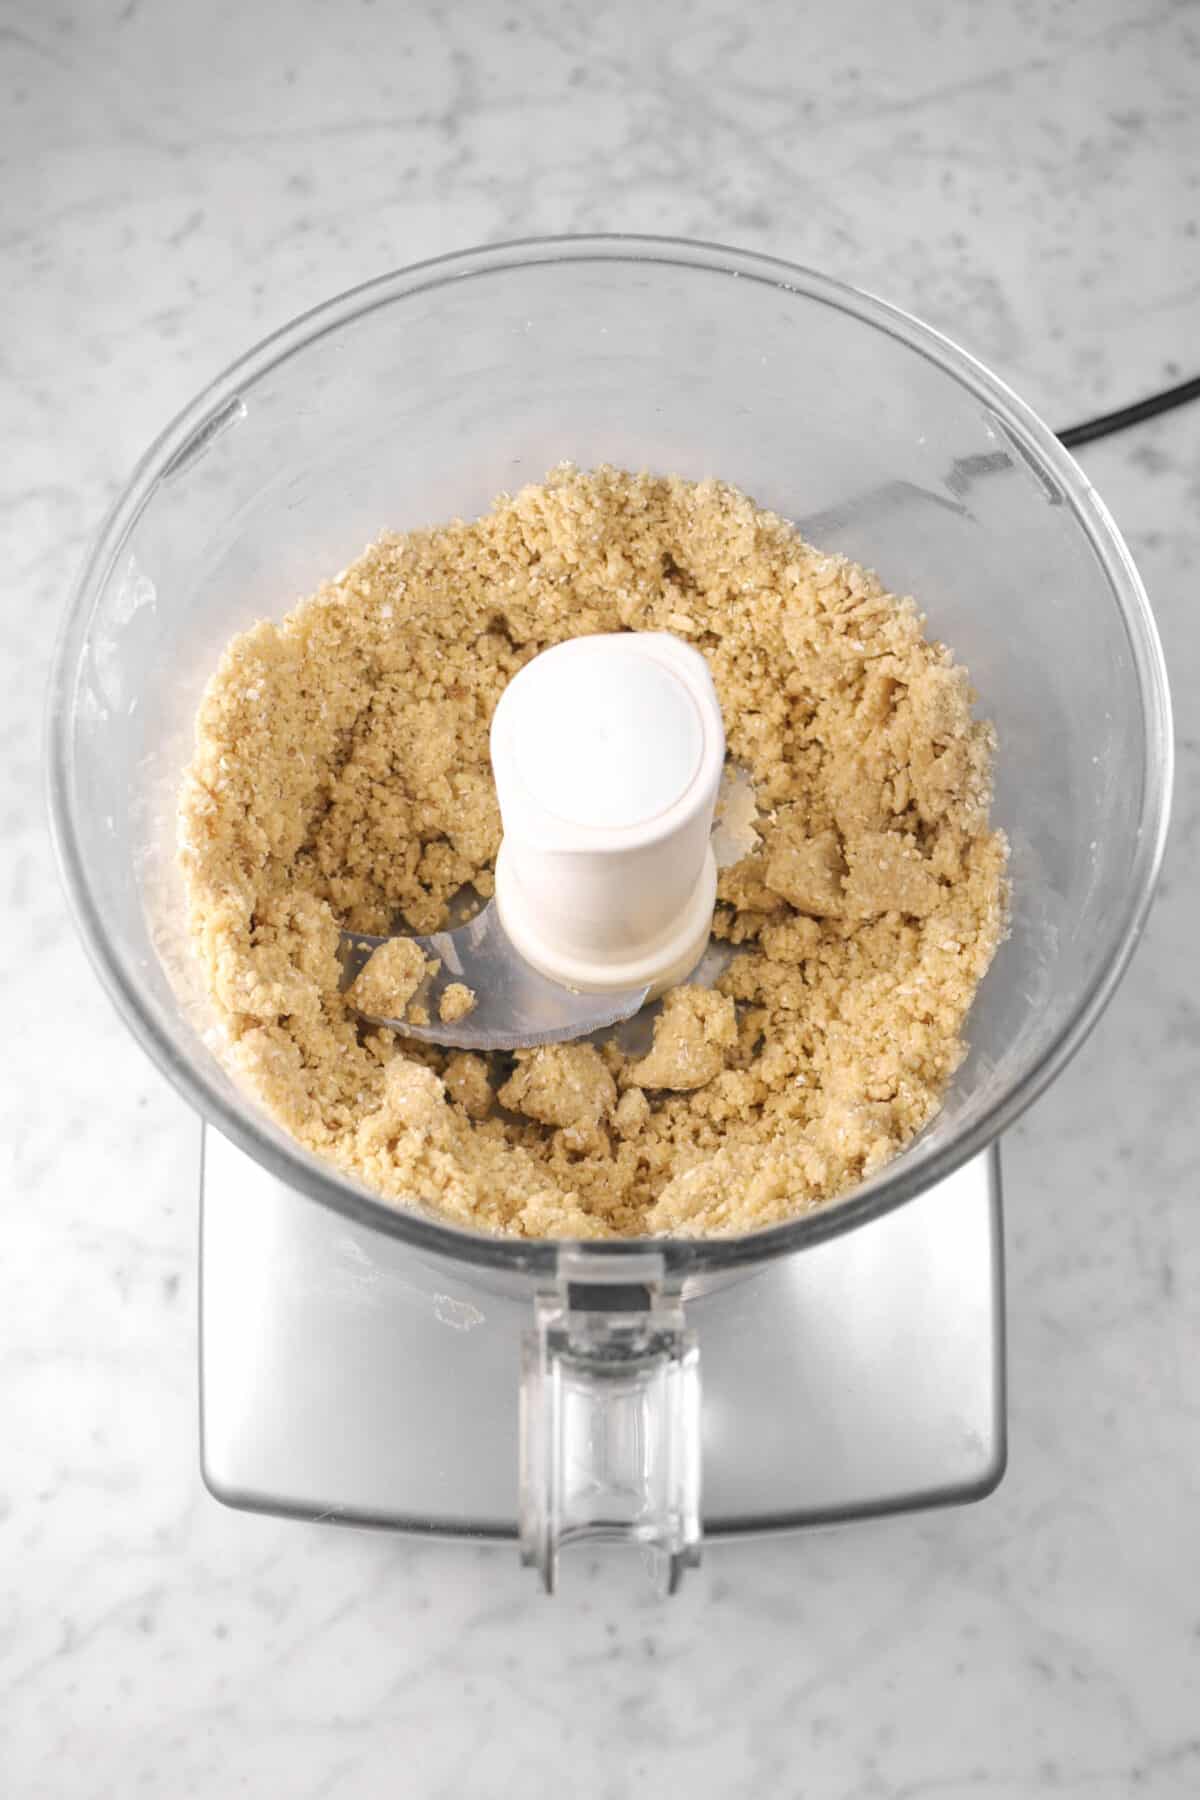 crumble mix in a food processor